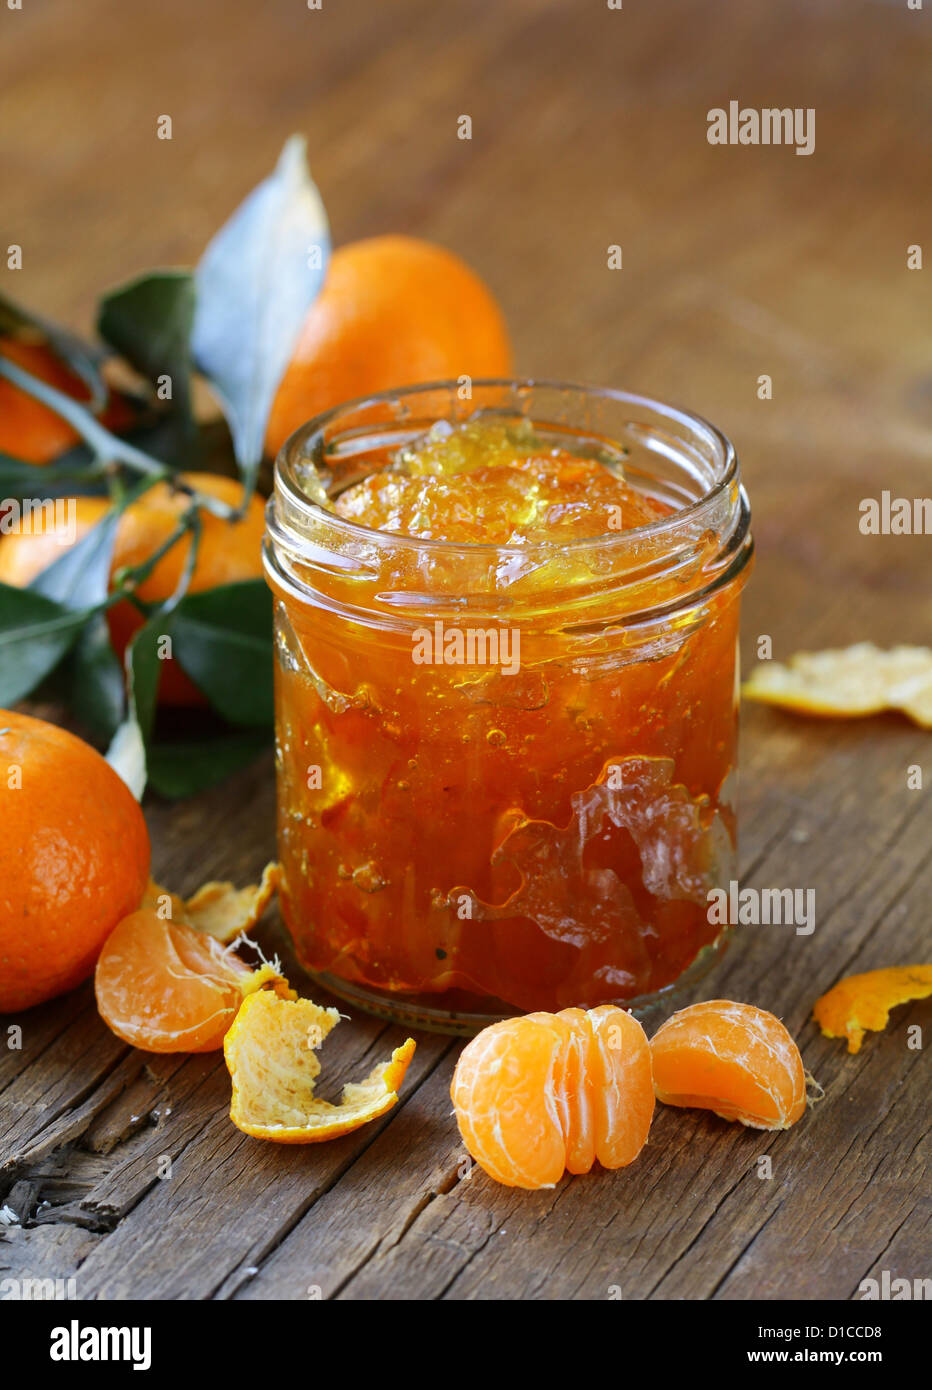 Download Orange Marmalade Jar High Resolution Stock Photography And Images Alamy Yellowimages Mockups